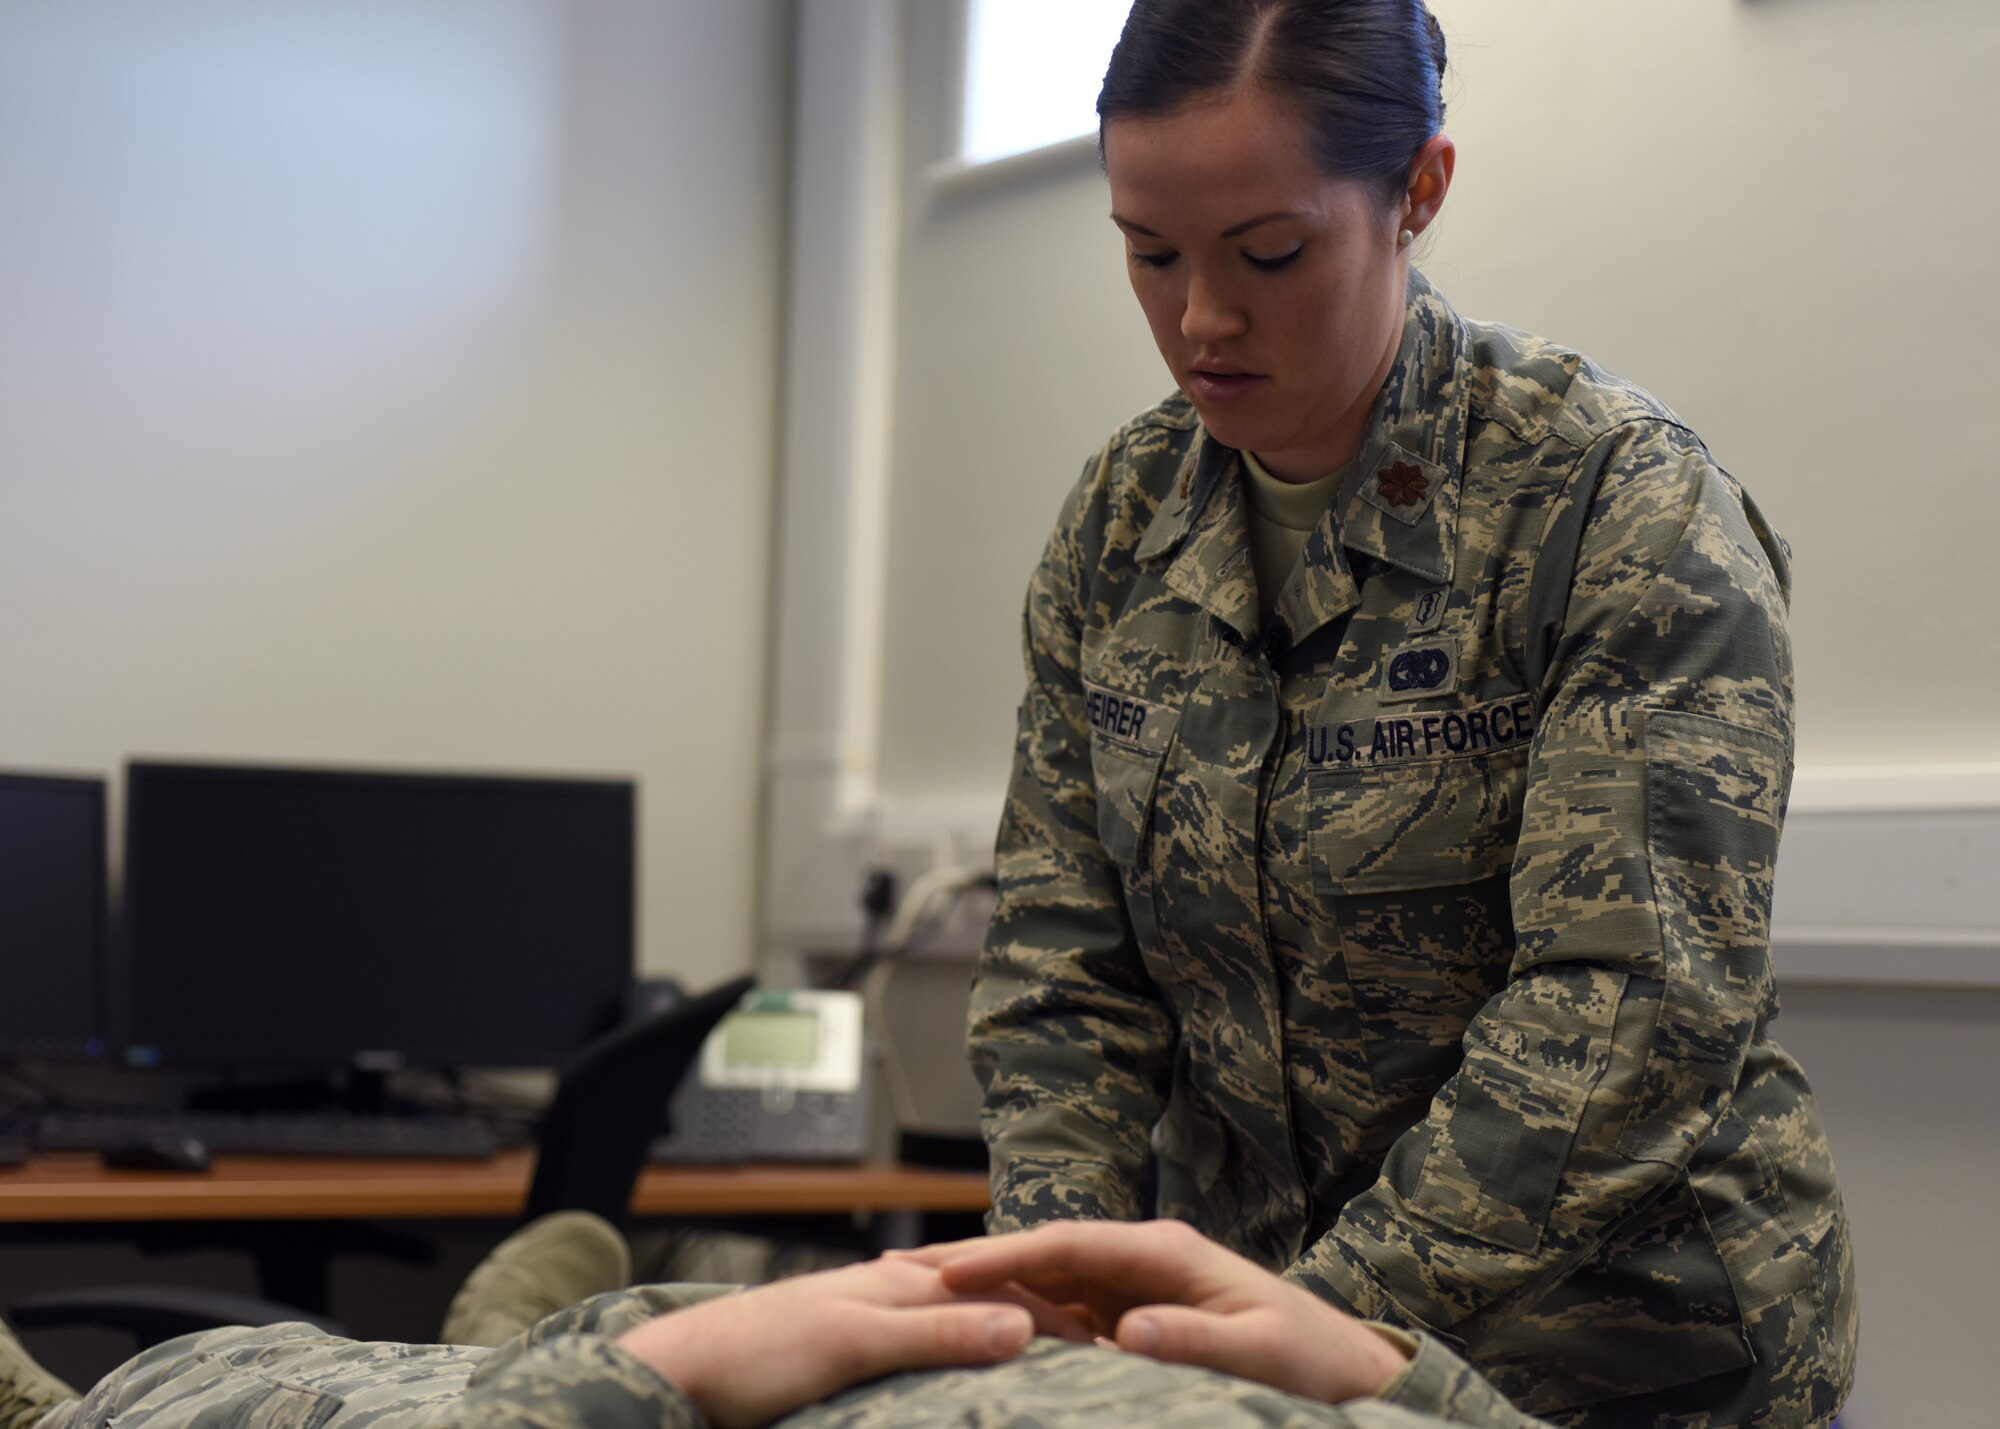 U.S. Air Force Maj. Vanessa Scheirer, 48th Medical Operations Squadron physical therapy element chief, performs an evaluation on a patient at Royal Air Force Lakenheath, England, March 21. The clinic is designed to facilitate easy and quick access to physical care for aircrews. (U.S. Air Force photo/Senior Airman Abby L. Finkel)